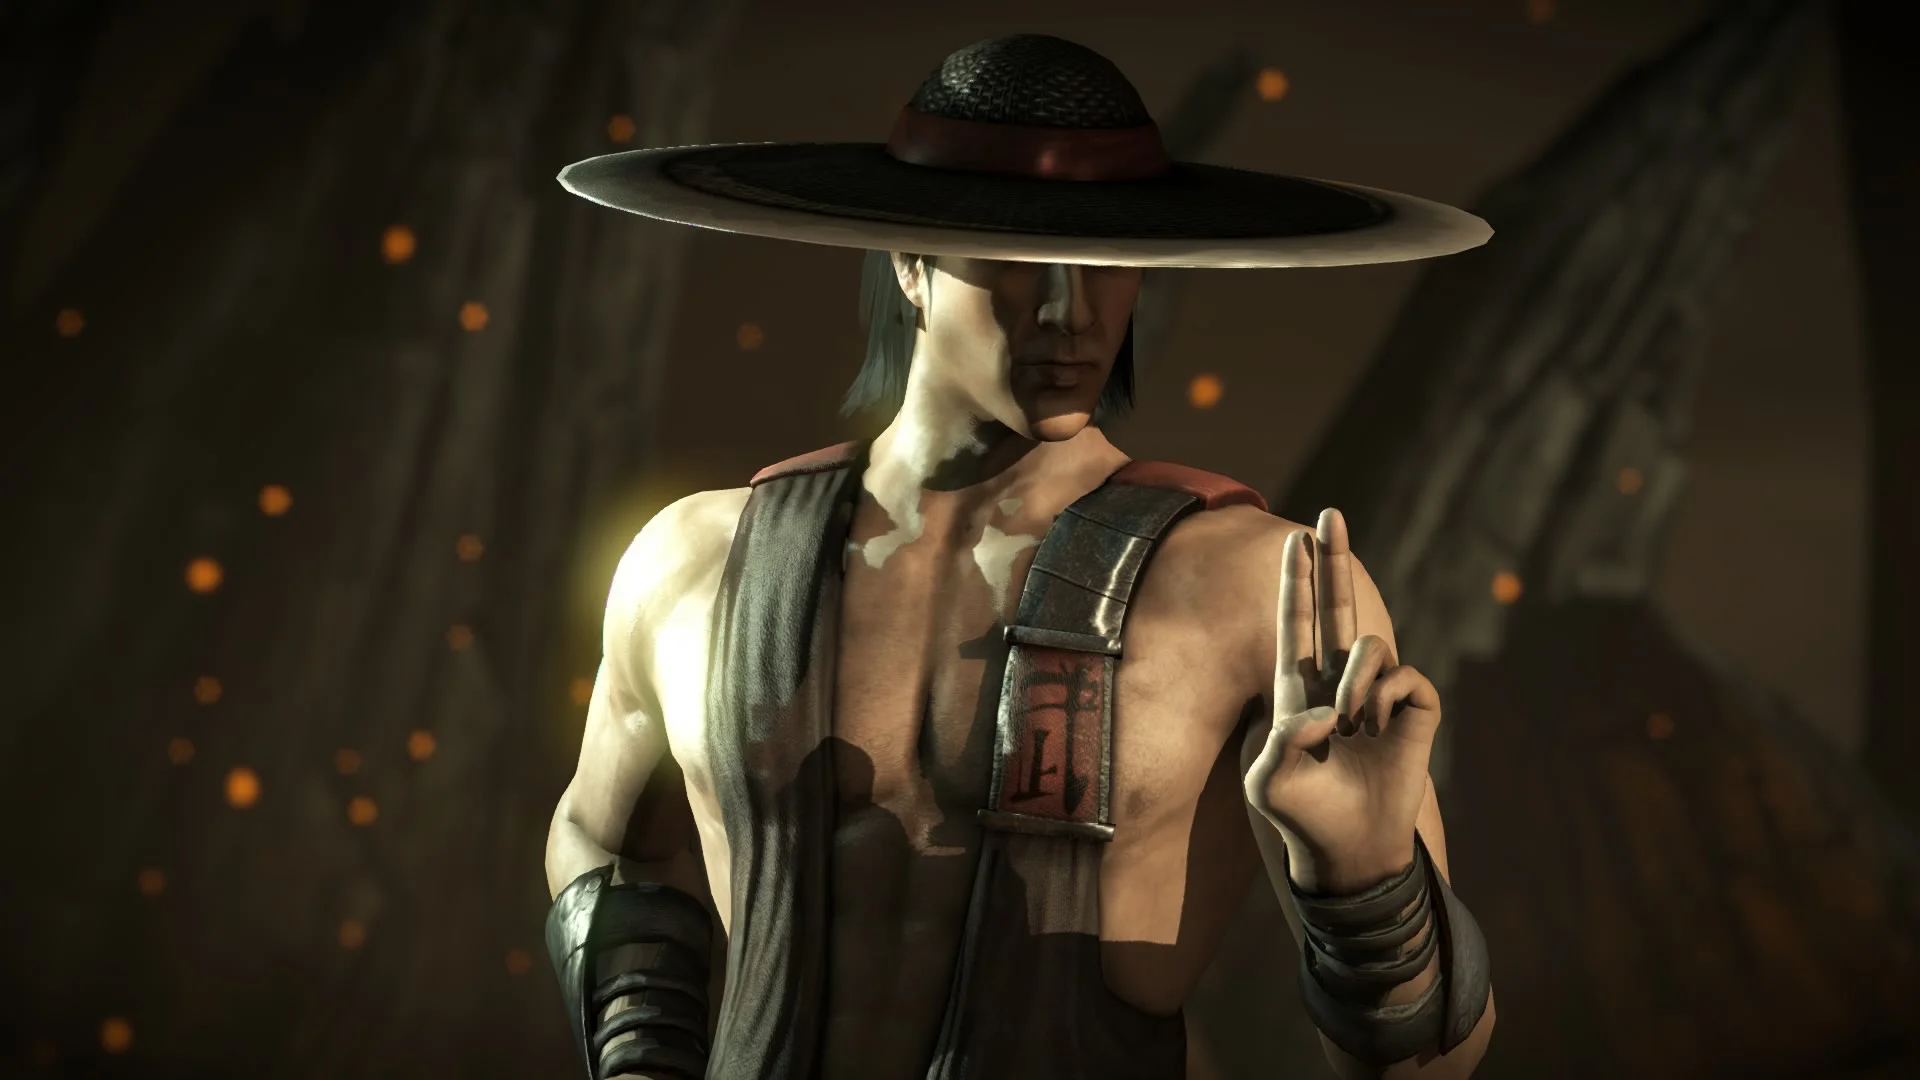 The craftsman recreated the hat of the character Kung Lao from Mortal Kombat